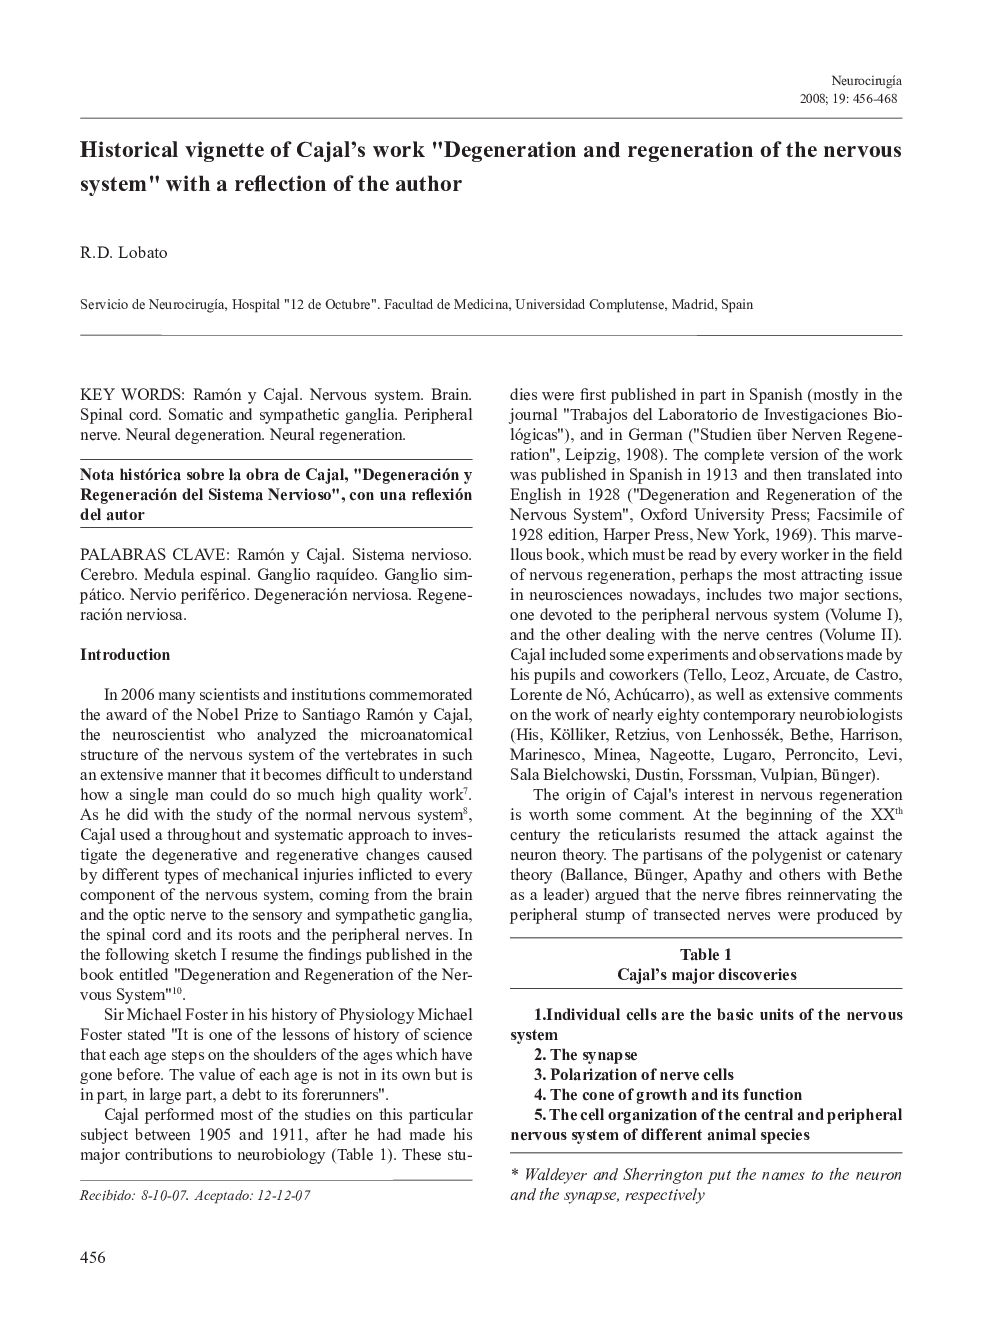 Historical vignette of Cajal's work “Degeneration and regeneration of the nervous system” with a reflection of the author